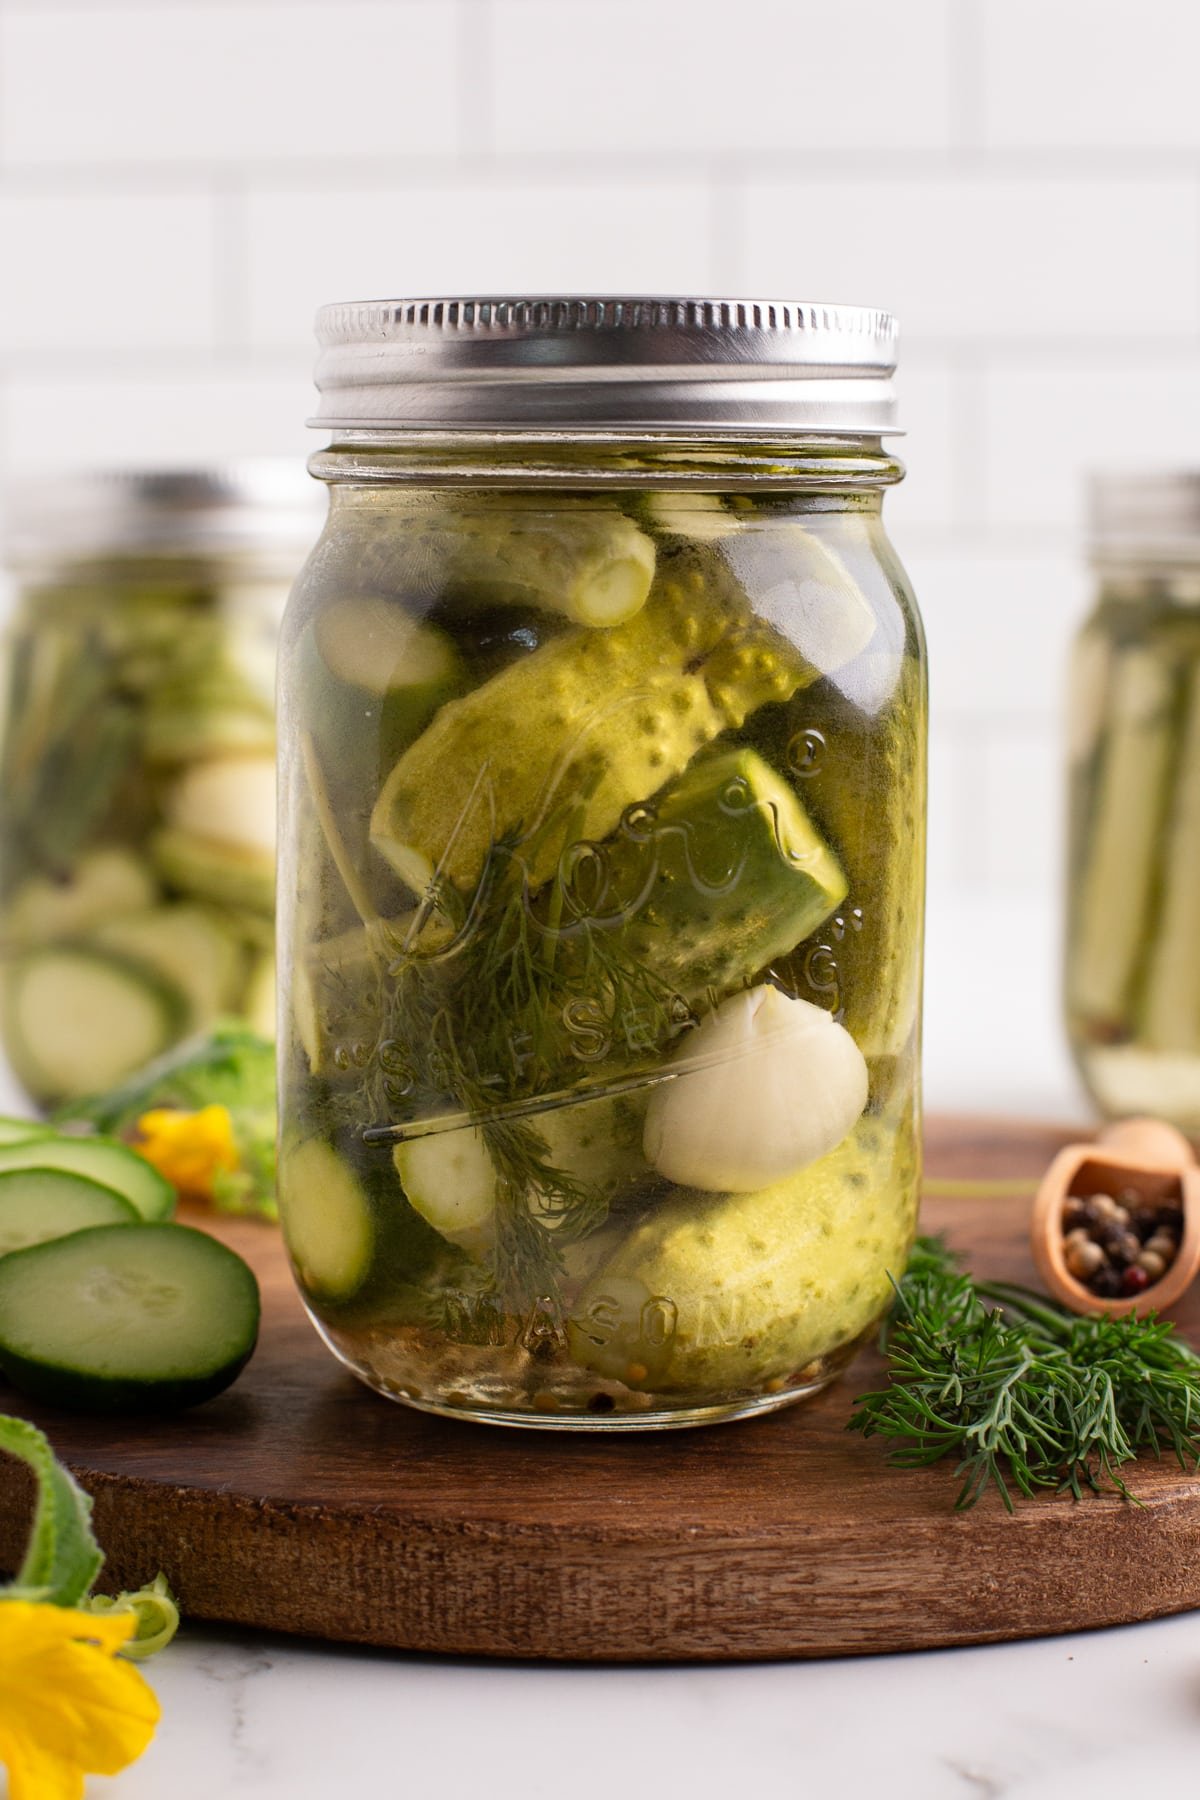 A jar of homemade pickles on a wood cutting board.